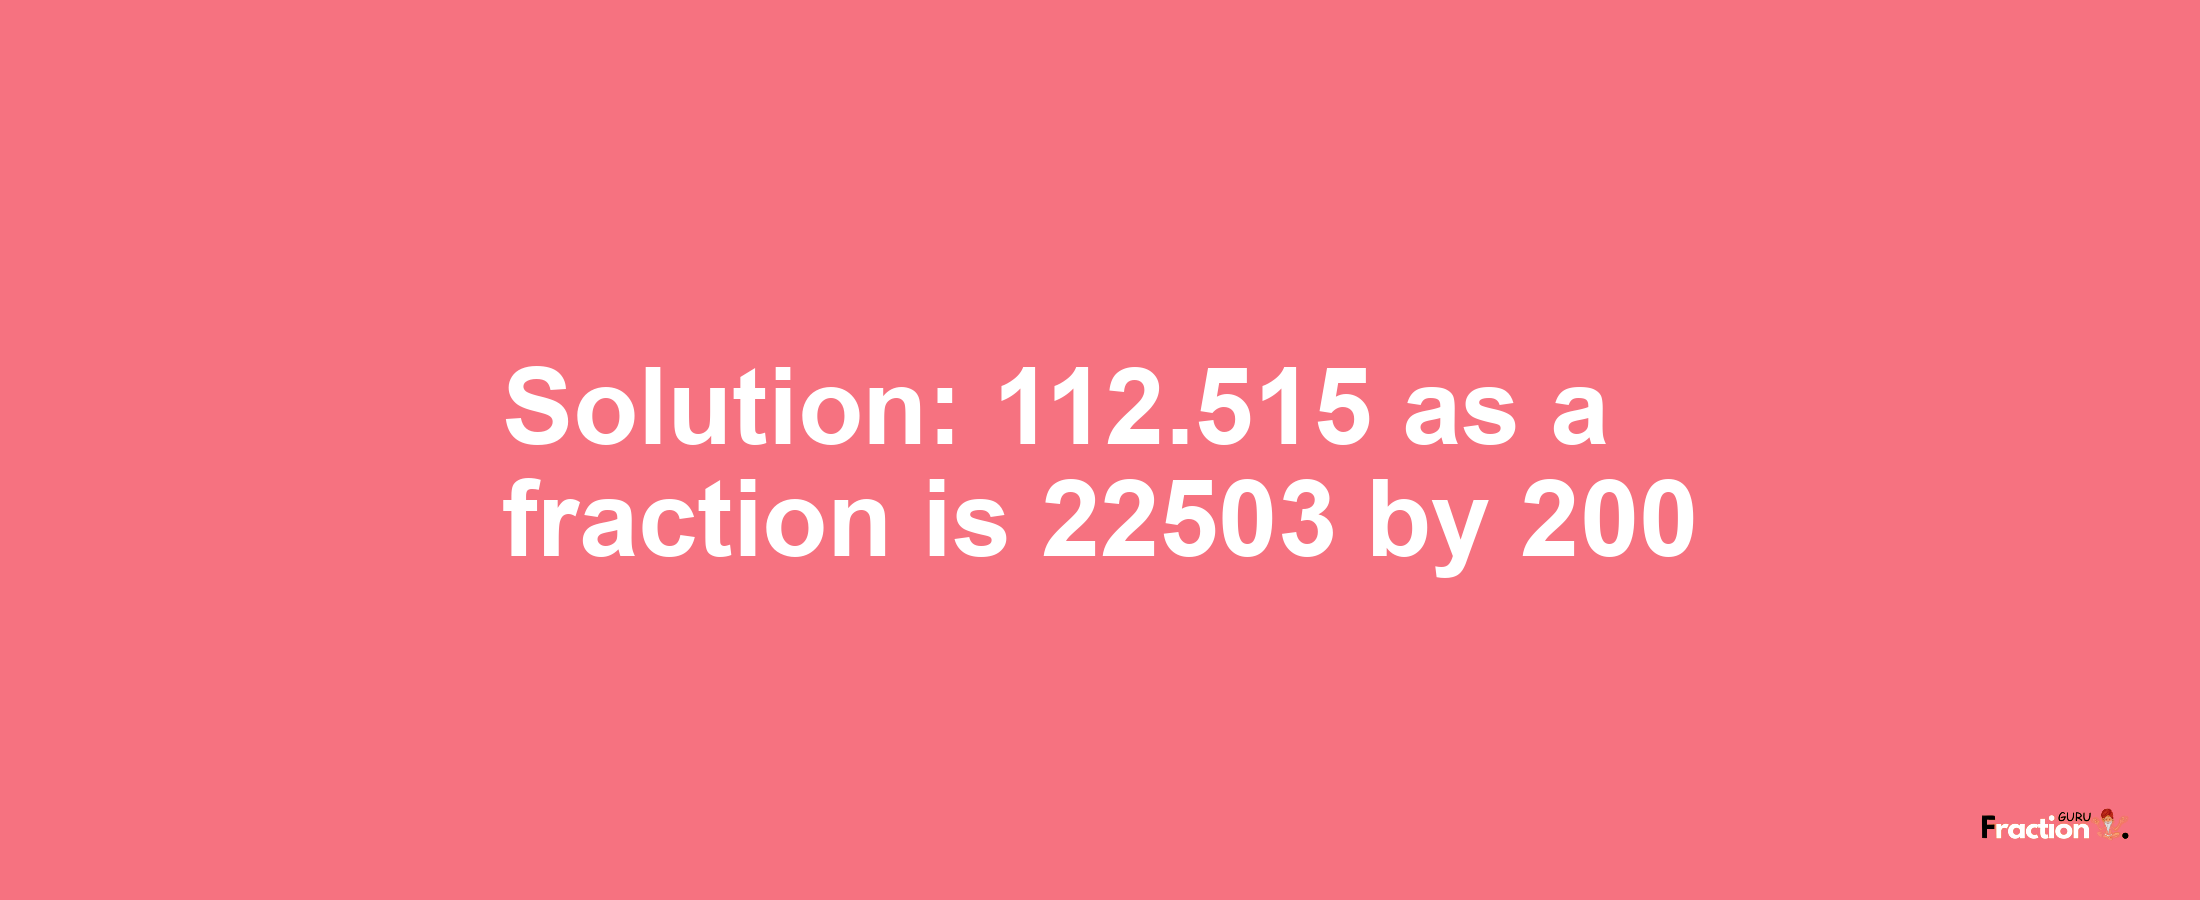 Solution:112.515 as a fraction is 22503/200